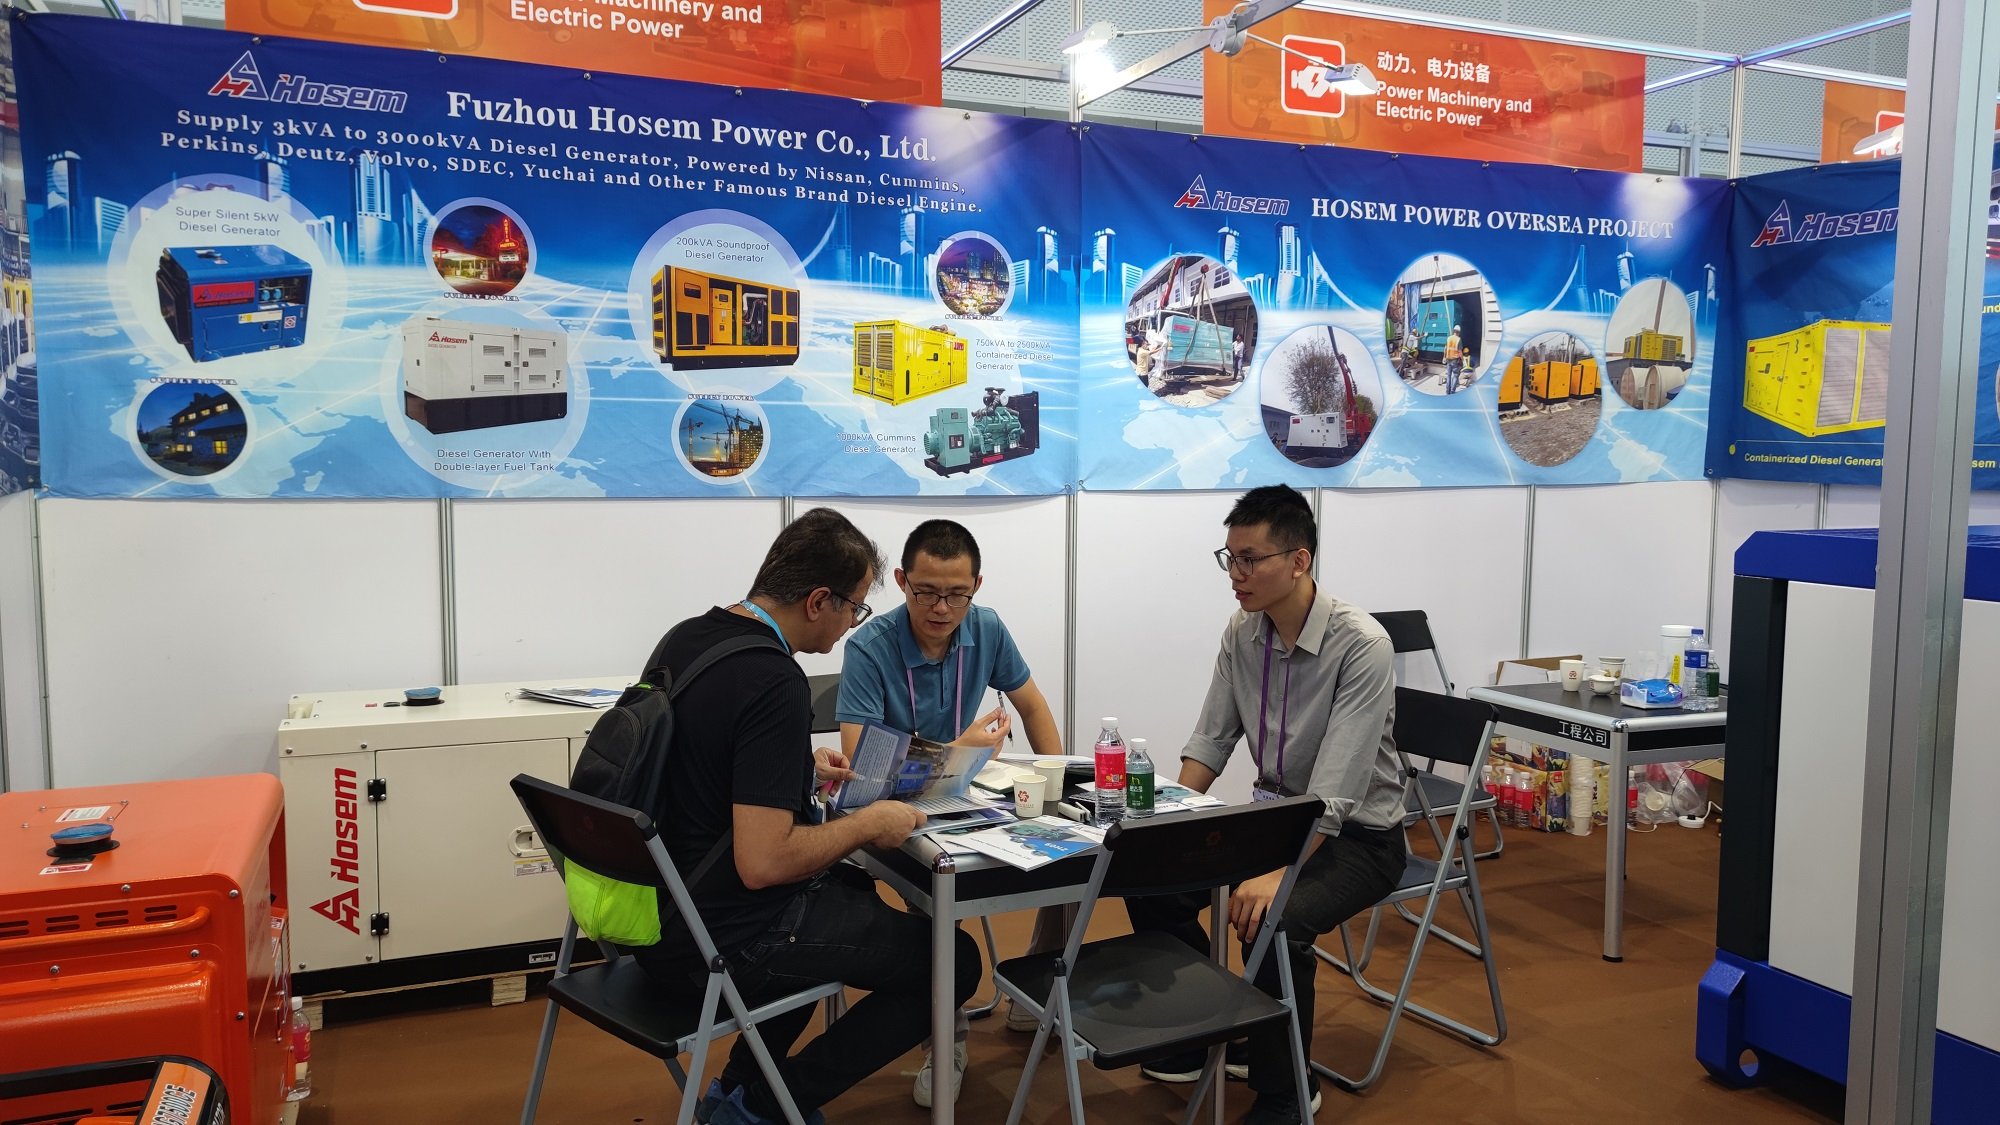 Hosem Power Successfuly completed the 134th Canton Fair of Diesel Generator Business